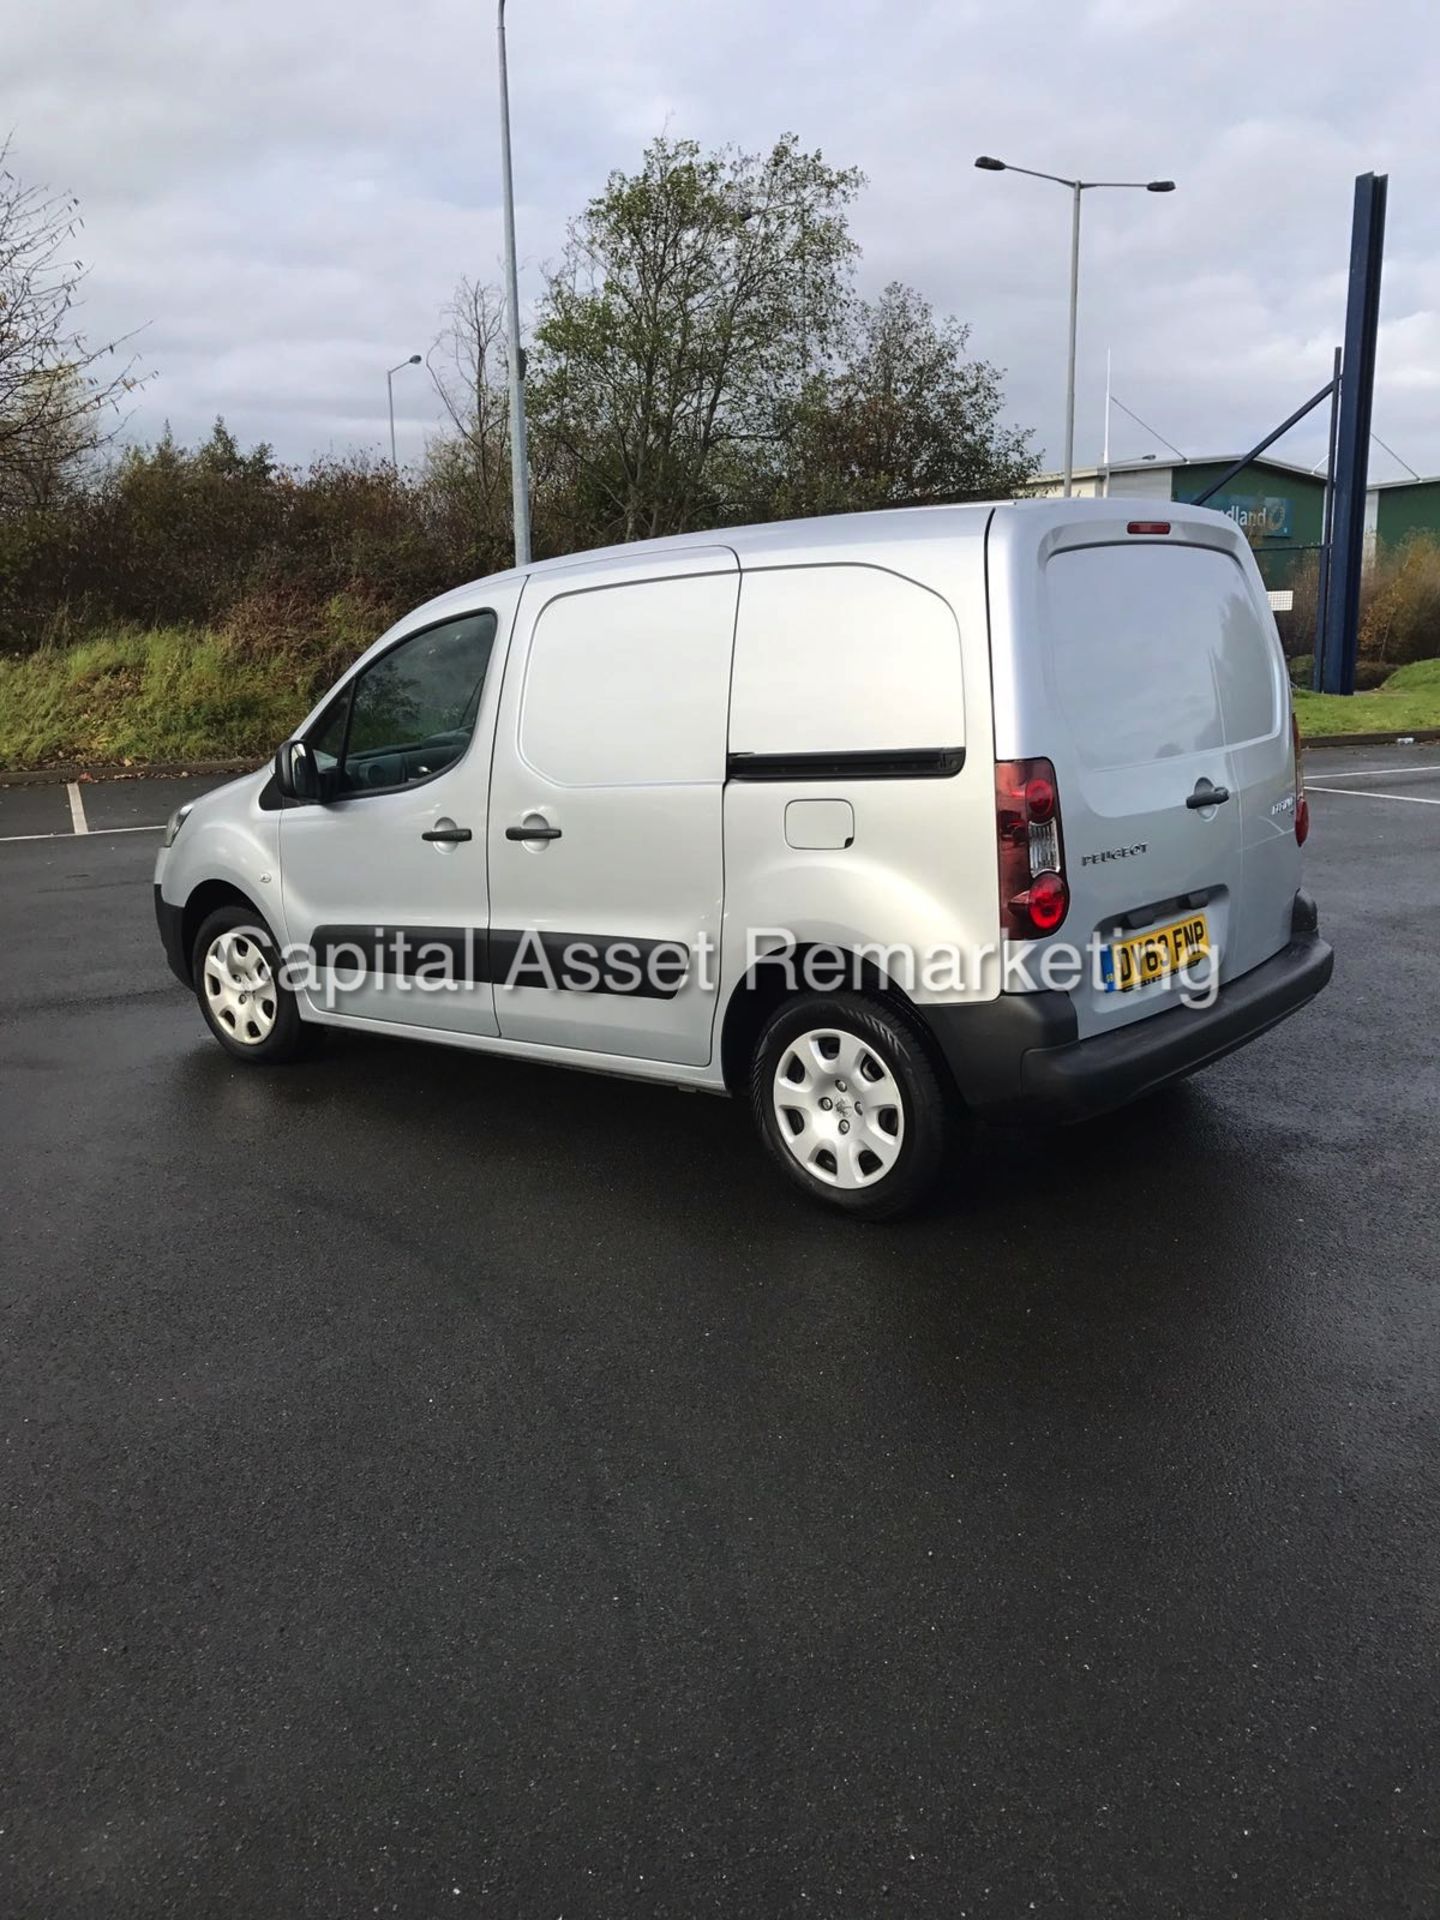 PEUGEOT PARTNER 1.6HDI "PROFESSIONAL" STOP/START - AIR CON - MASSIVE SPEC - SILVER - (2014) MODEL!!! - Image 5 of 12